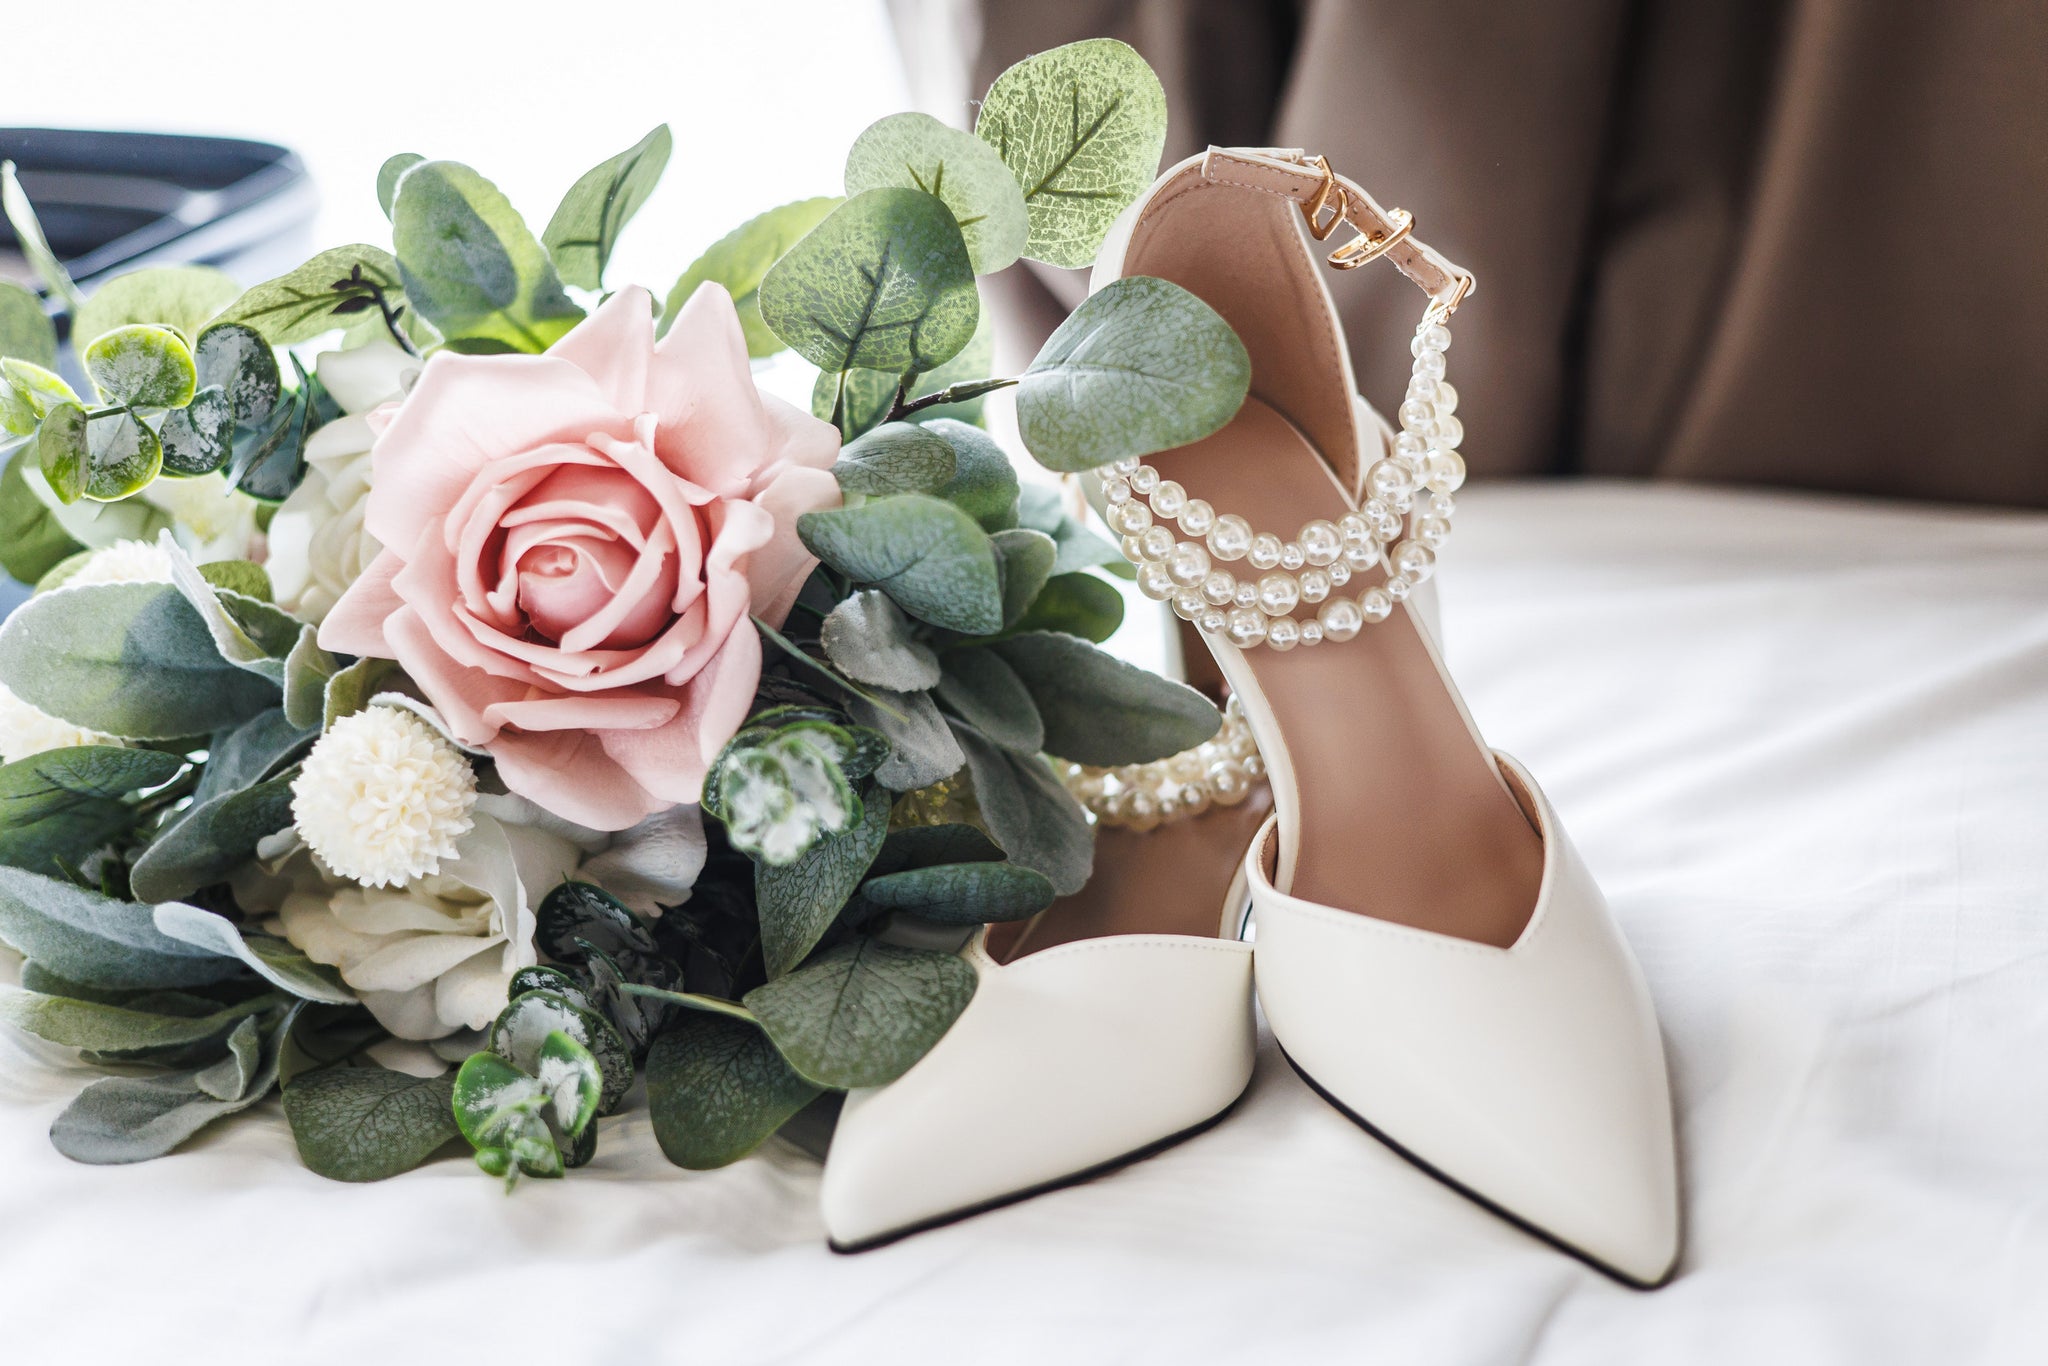 Cream bridal heels with pearl embellishments beside a pastel bouquet by Hidden Botanics.